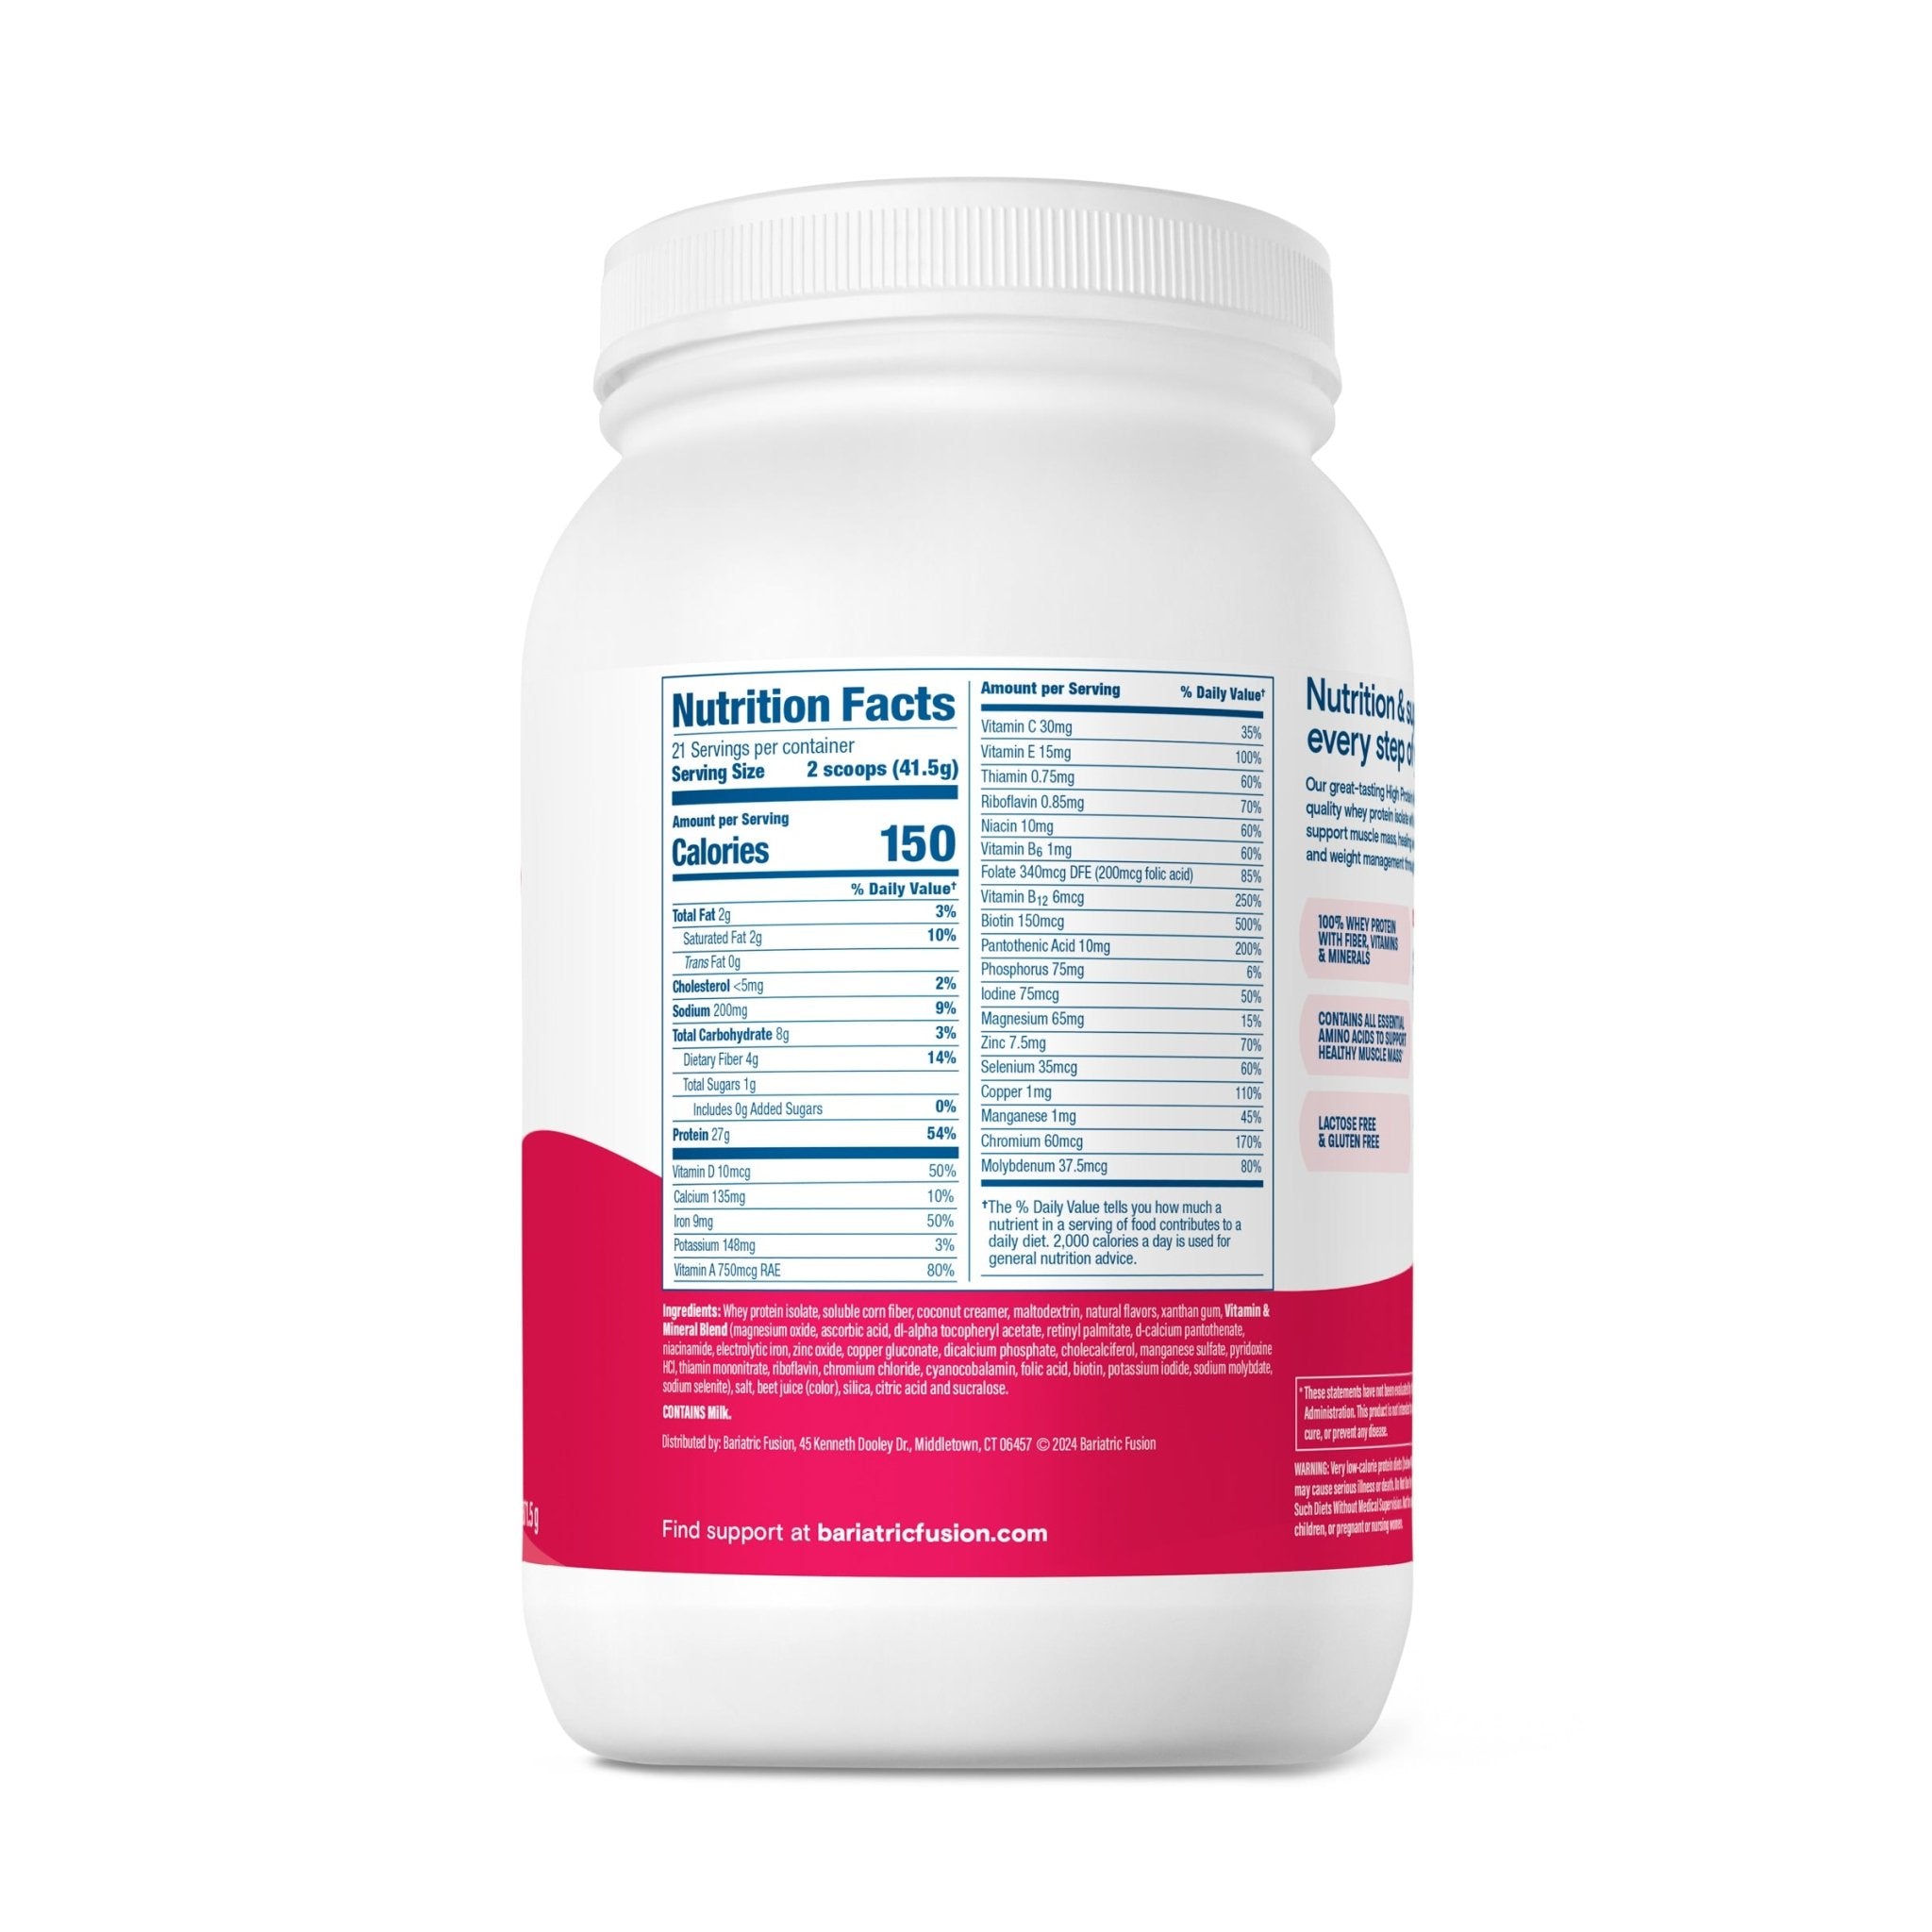 Bariatric Fusion Strawberry High Protein Meal Replacement ingredients.